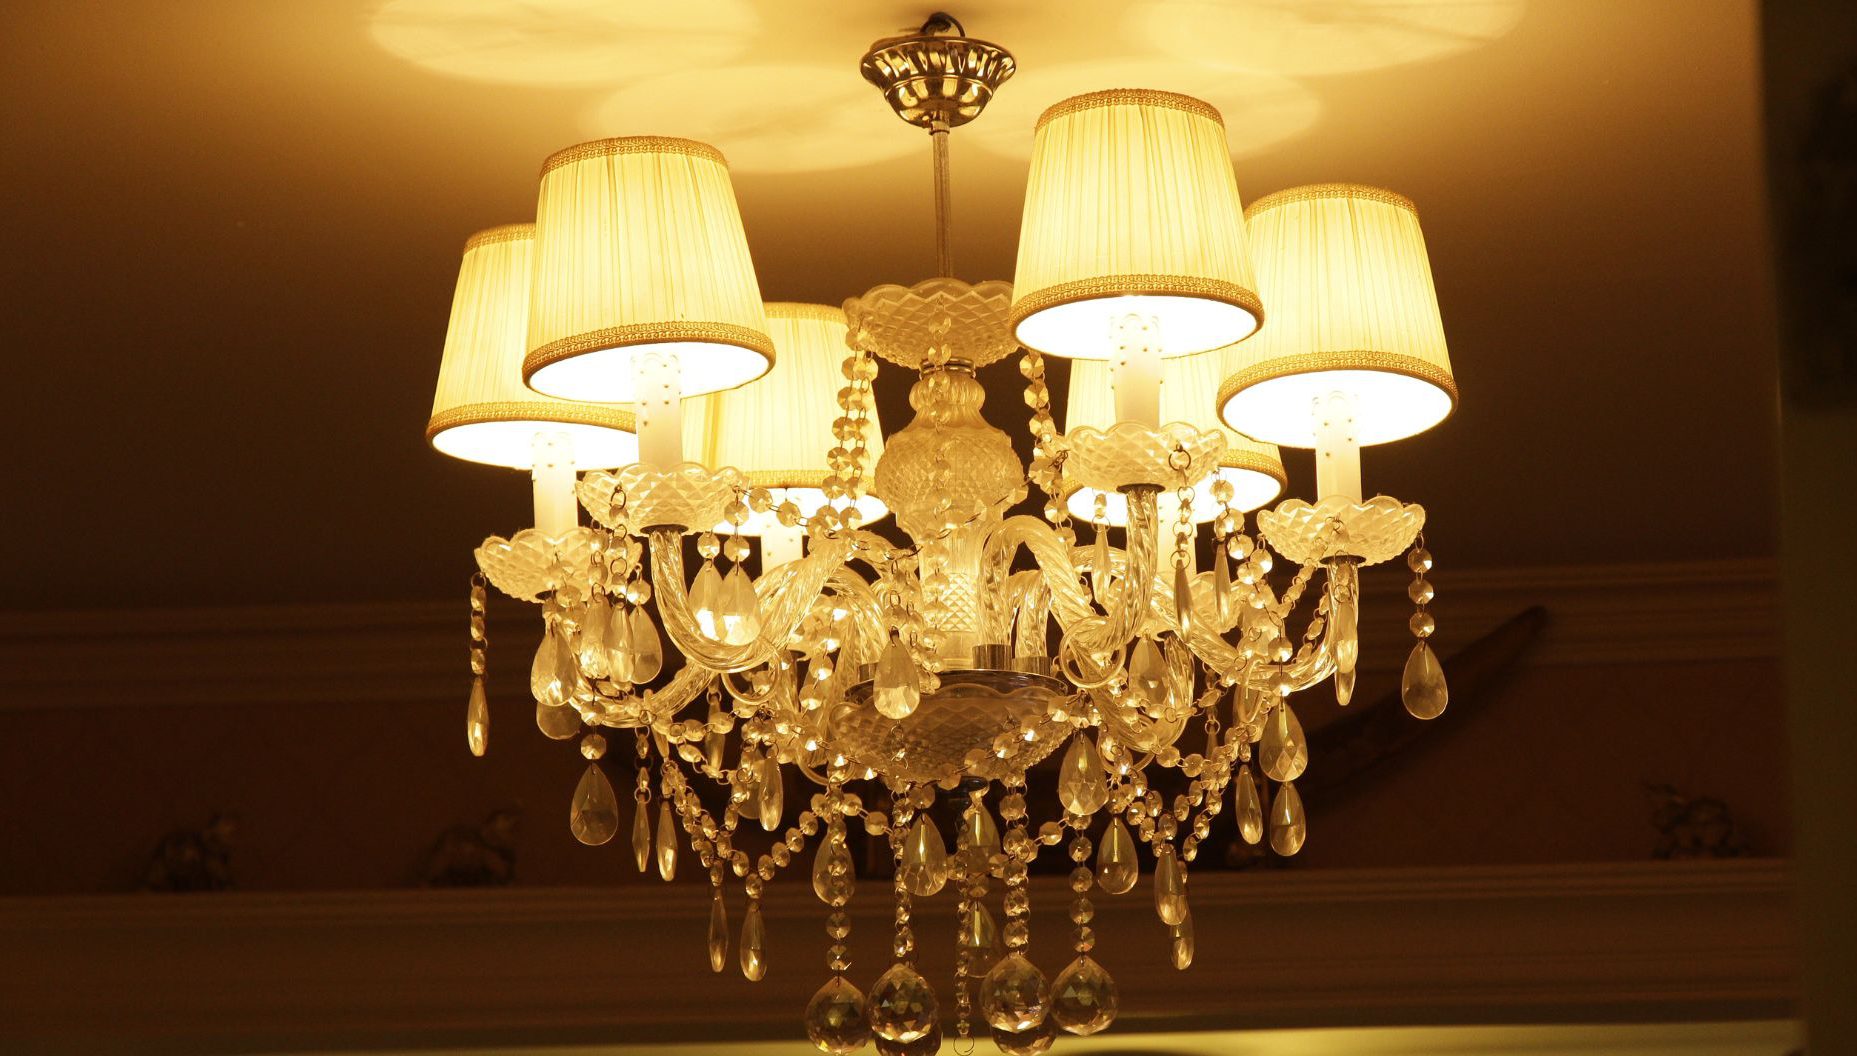 Global Decorative Lighting Market Growth Analysis And Indications – Includes Decorative Lighting Market Share